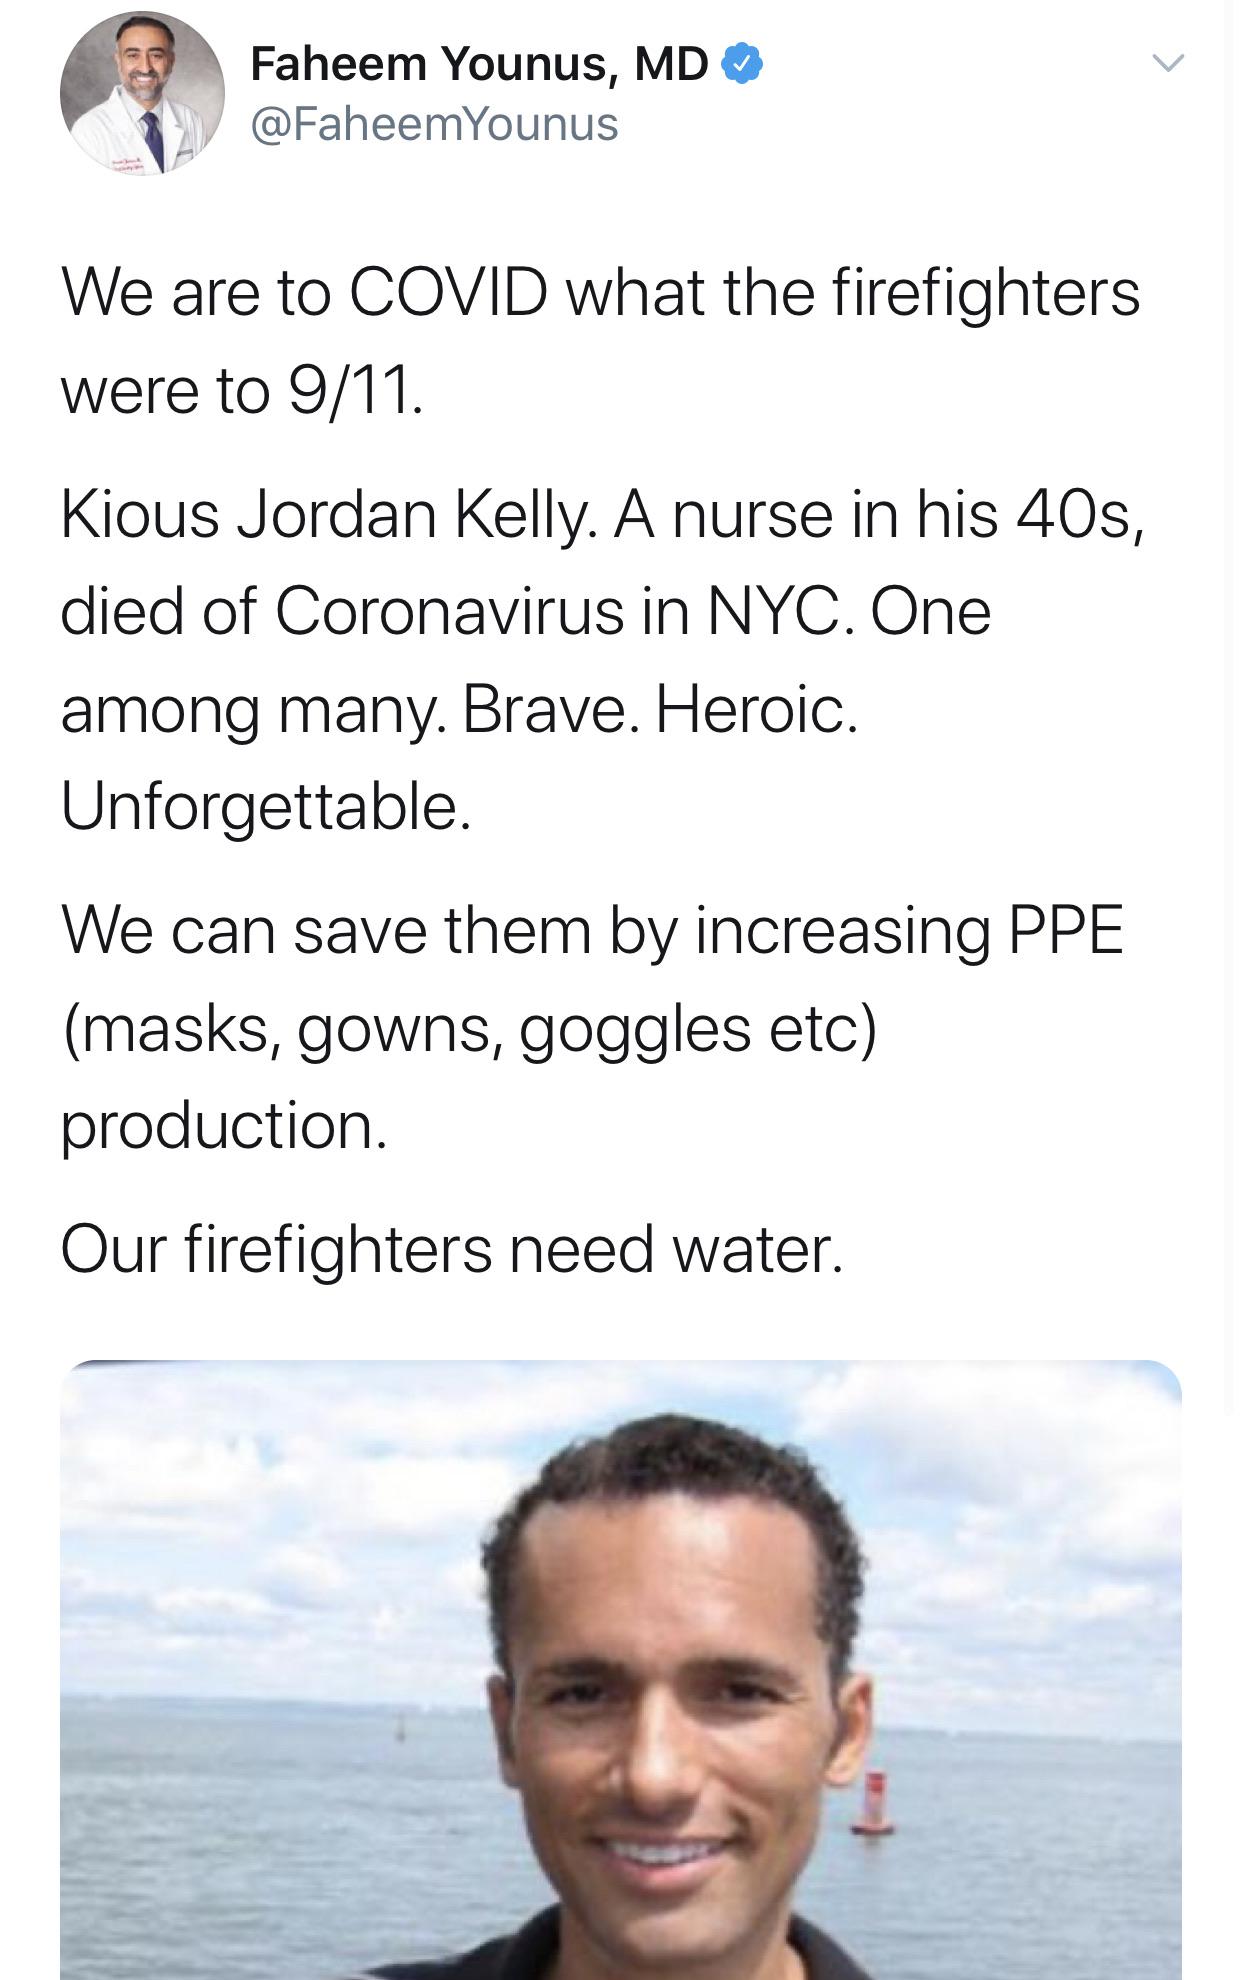 water - Faheem Younus, Md We are to Covid what the firefighters were to 911. Kious Jordan Kelly. A nurse in his 40s, died of Coronavirus in Nyc. One among many. Brave. Heroic. Unforgettable. We can save them by increasing Ppe masks, gowns, goggles etc pro